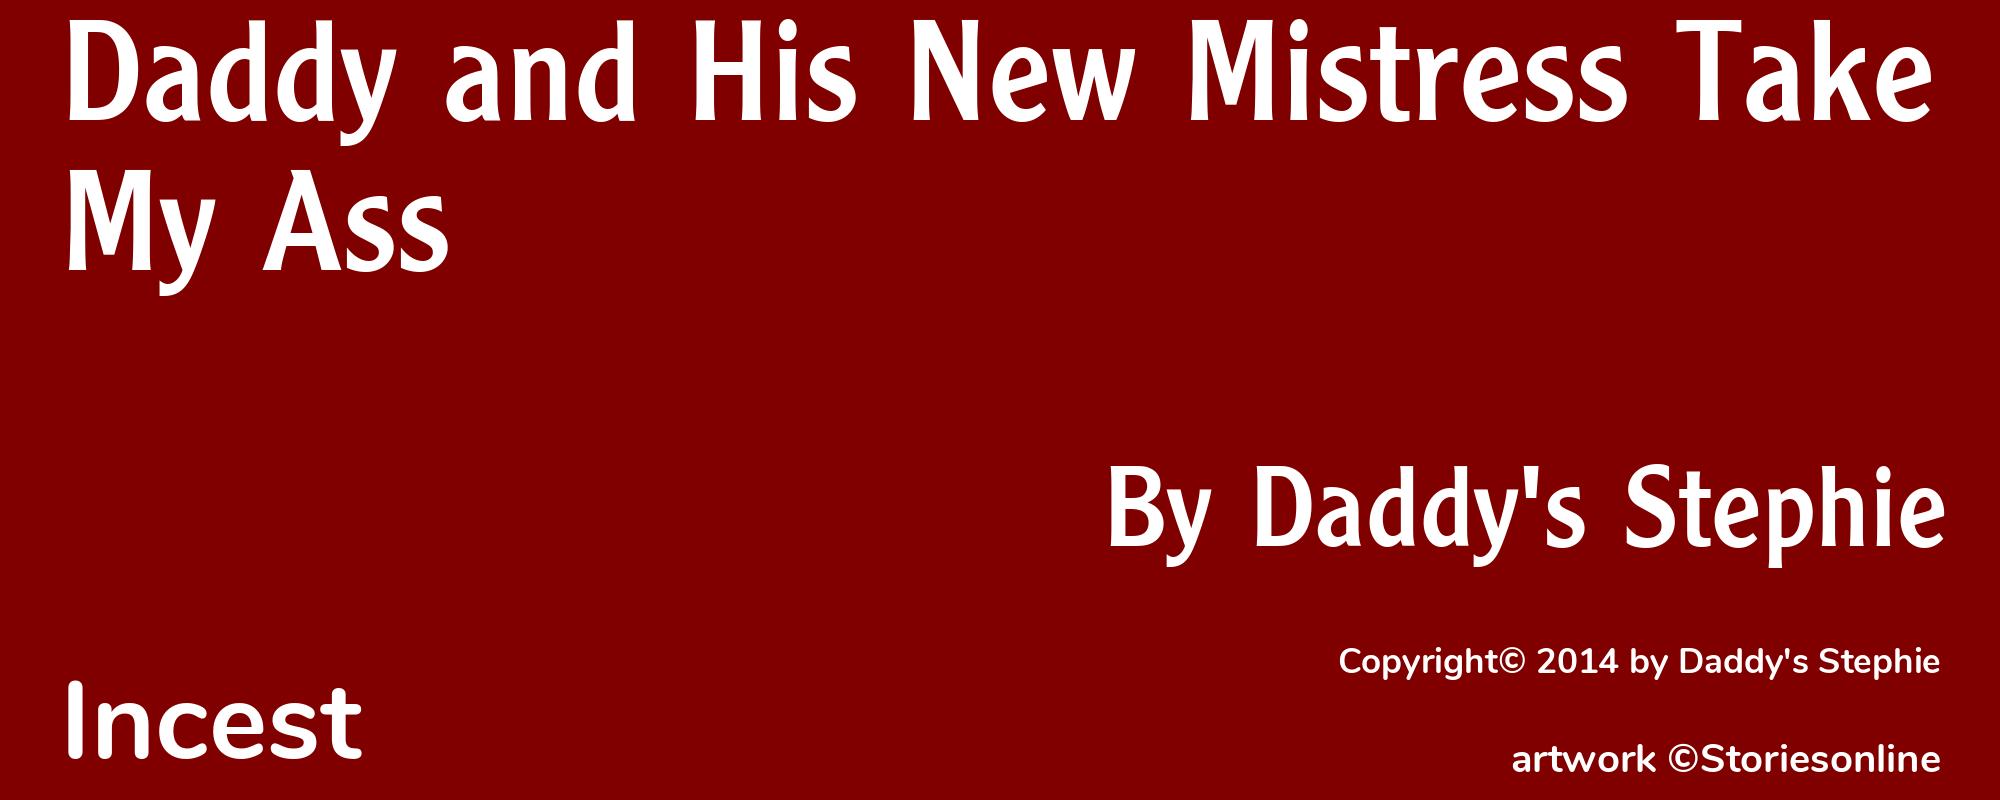 Daddy and His New Mistress Take My Ass - Cover